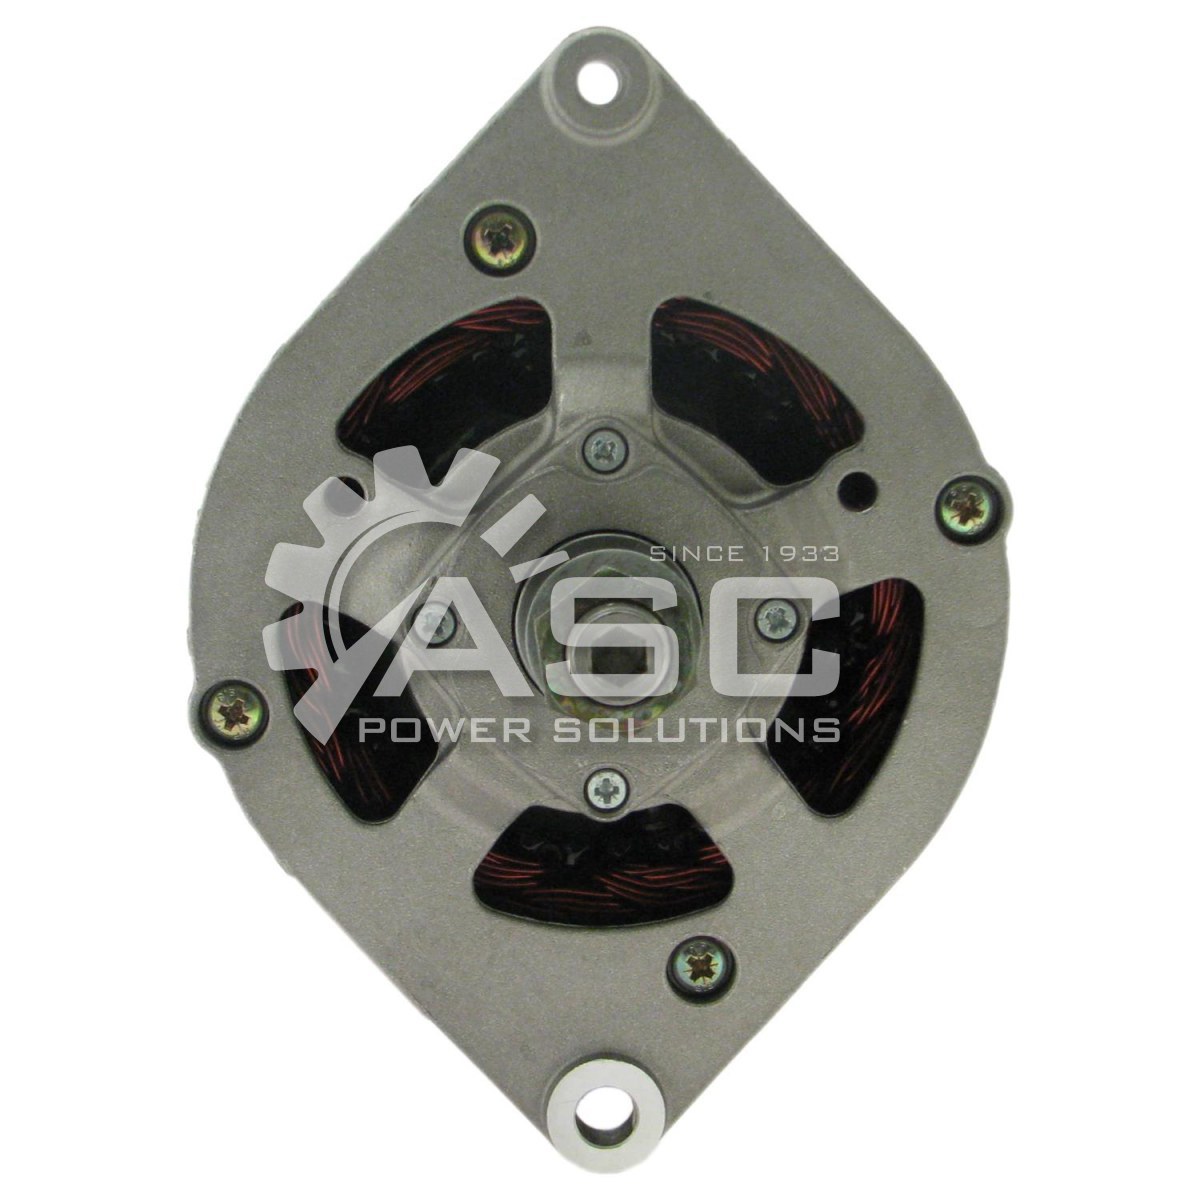 A241412_REMAN ASC POWER SOLUTIONS BOSCH ALTERNATOR FOR CASE AND FORD AGRICULTURE APPLICATIONS 24V 45AMP BI DIRECTIONAL